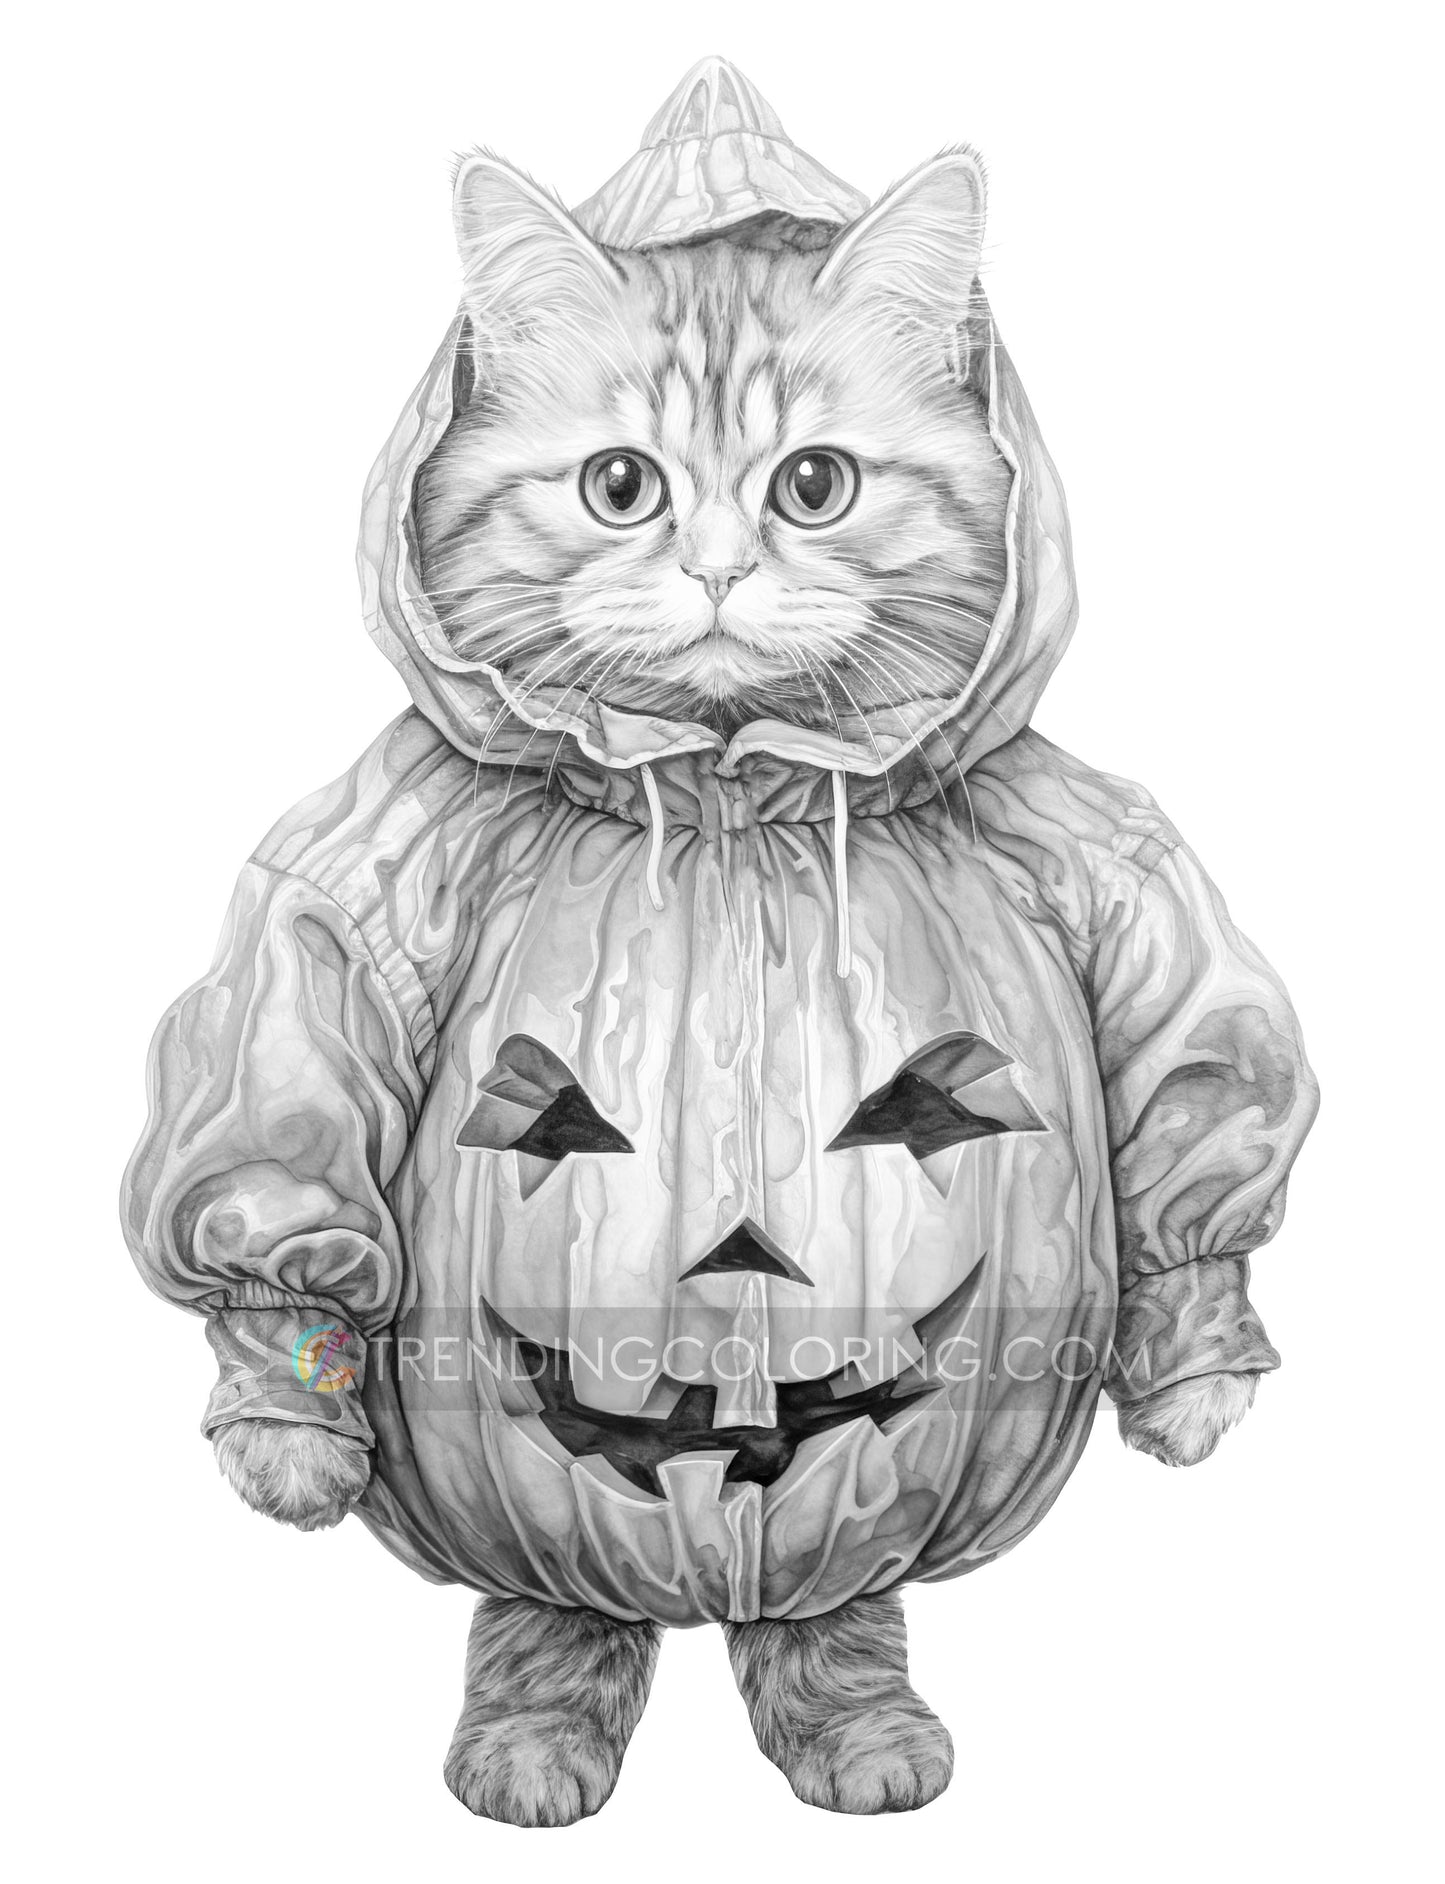 25 Pumpkin World Grayscale Coloring Pages - Instant Download - Printable PDF Dark/Light